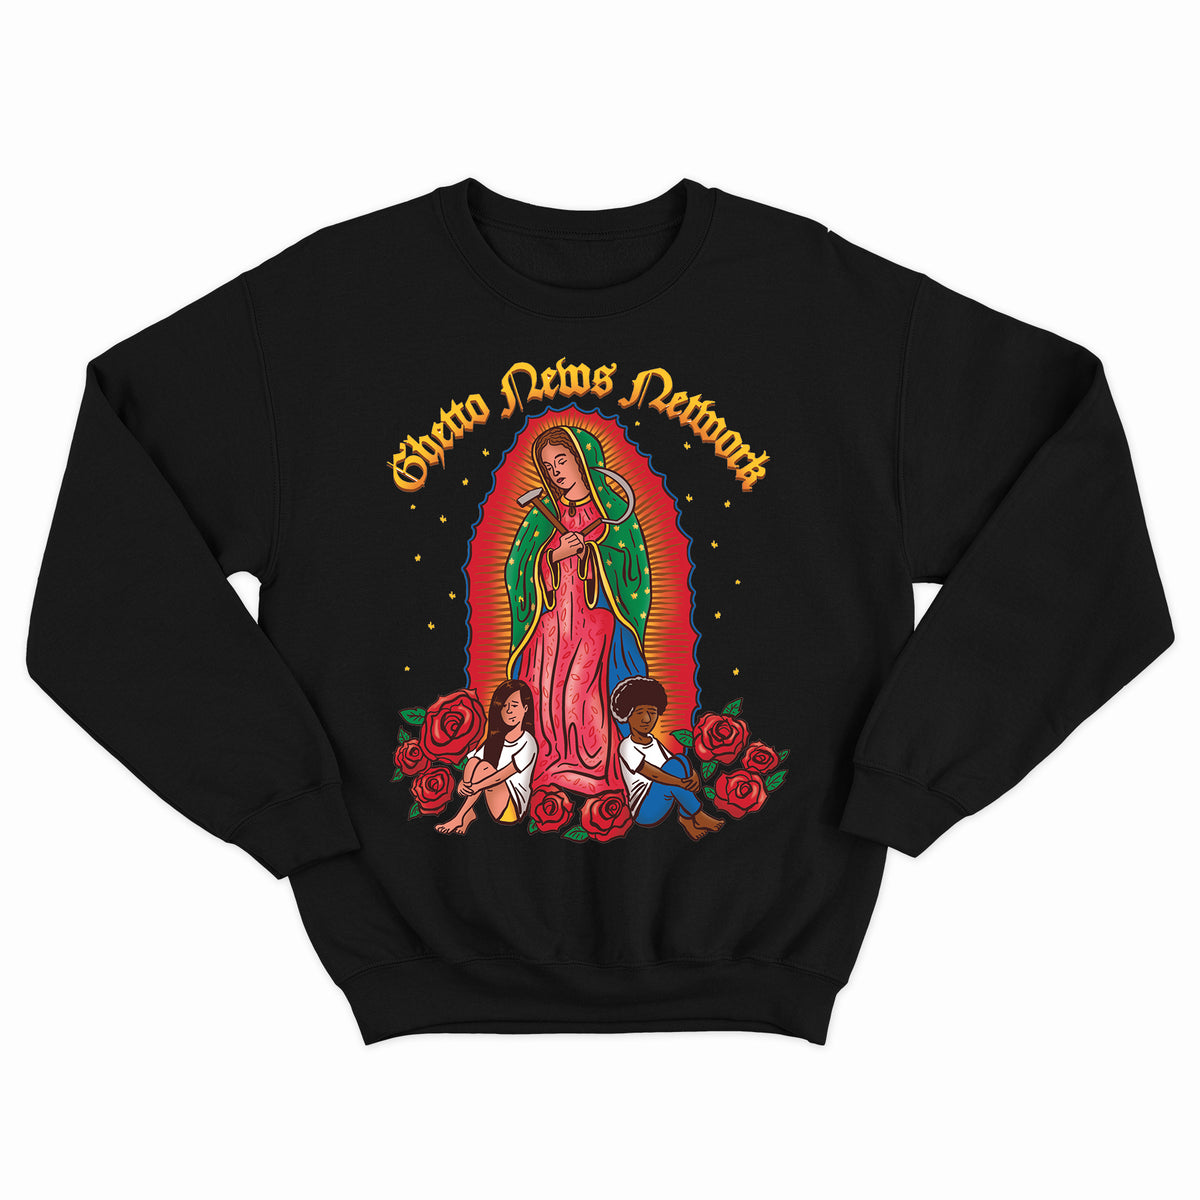 Shop and Buy Ghetto News Network Sweaters